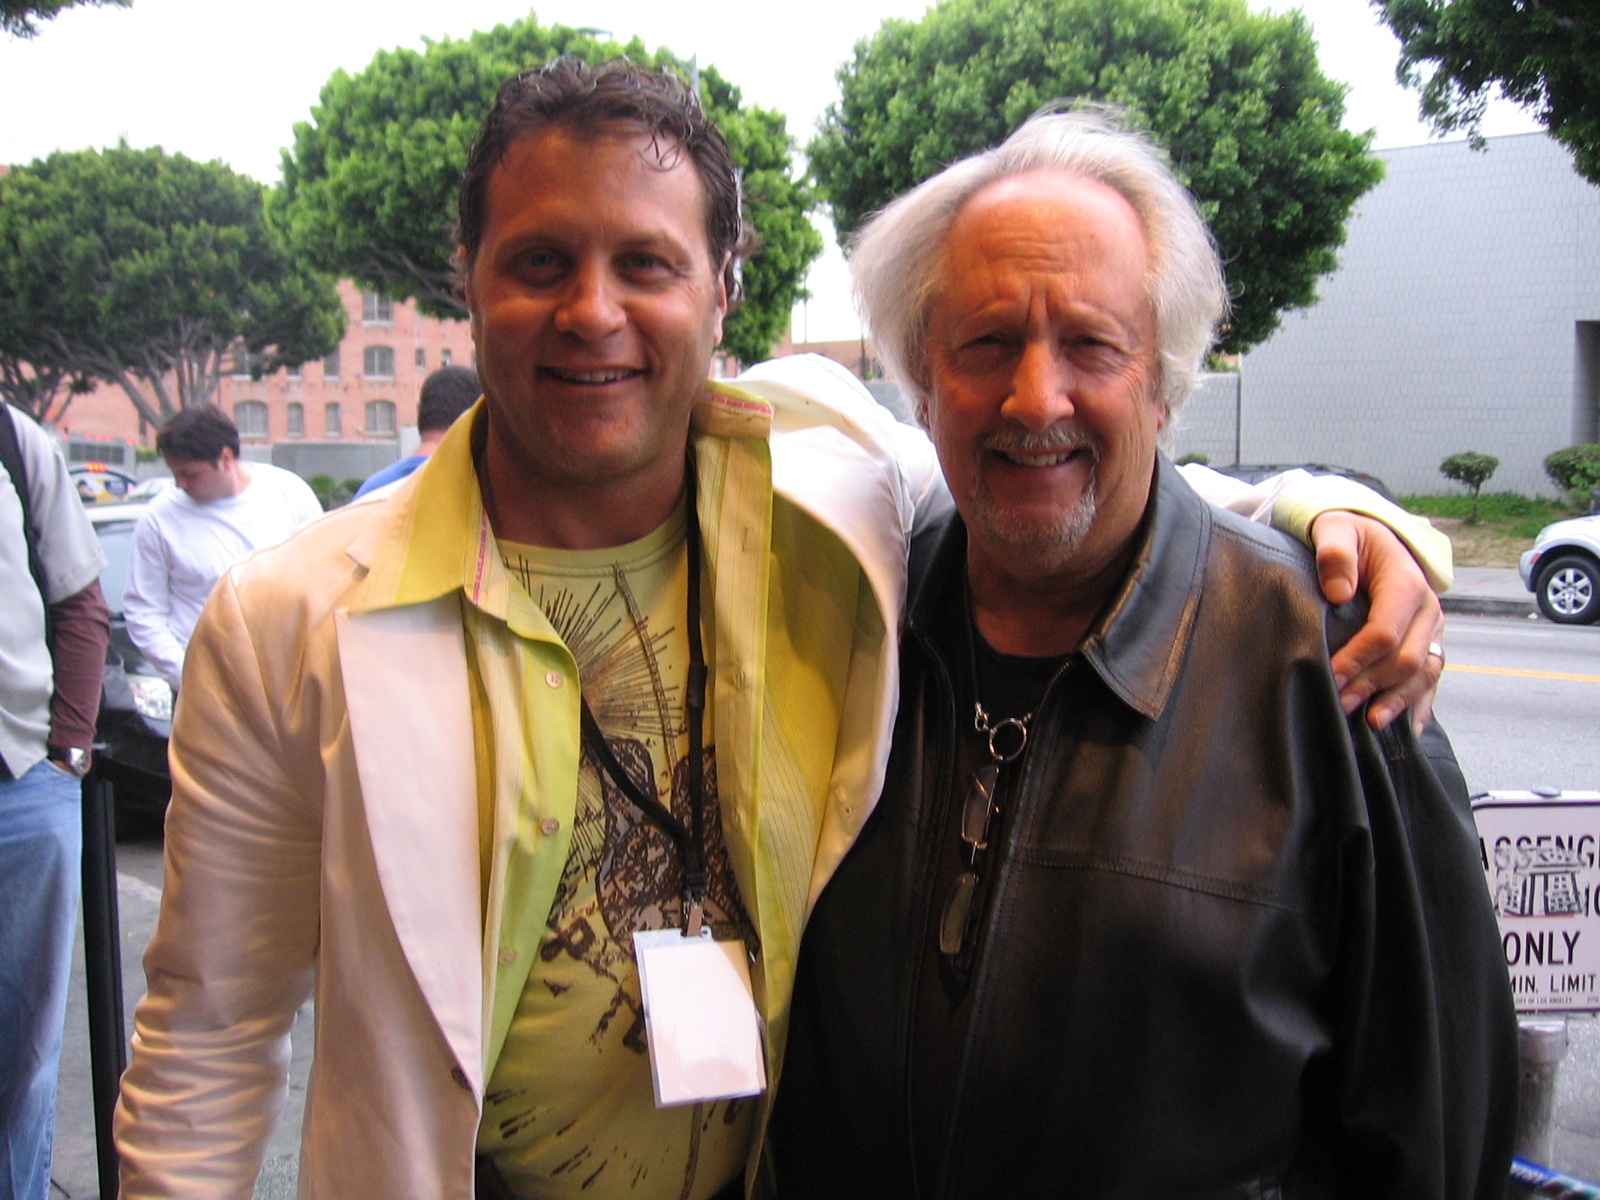 With screenwriter Roger Towne of the 